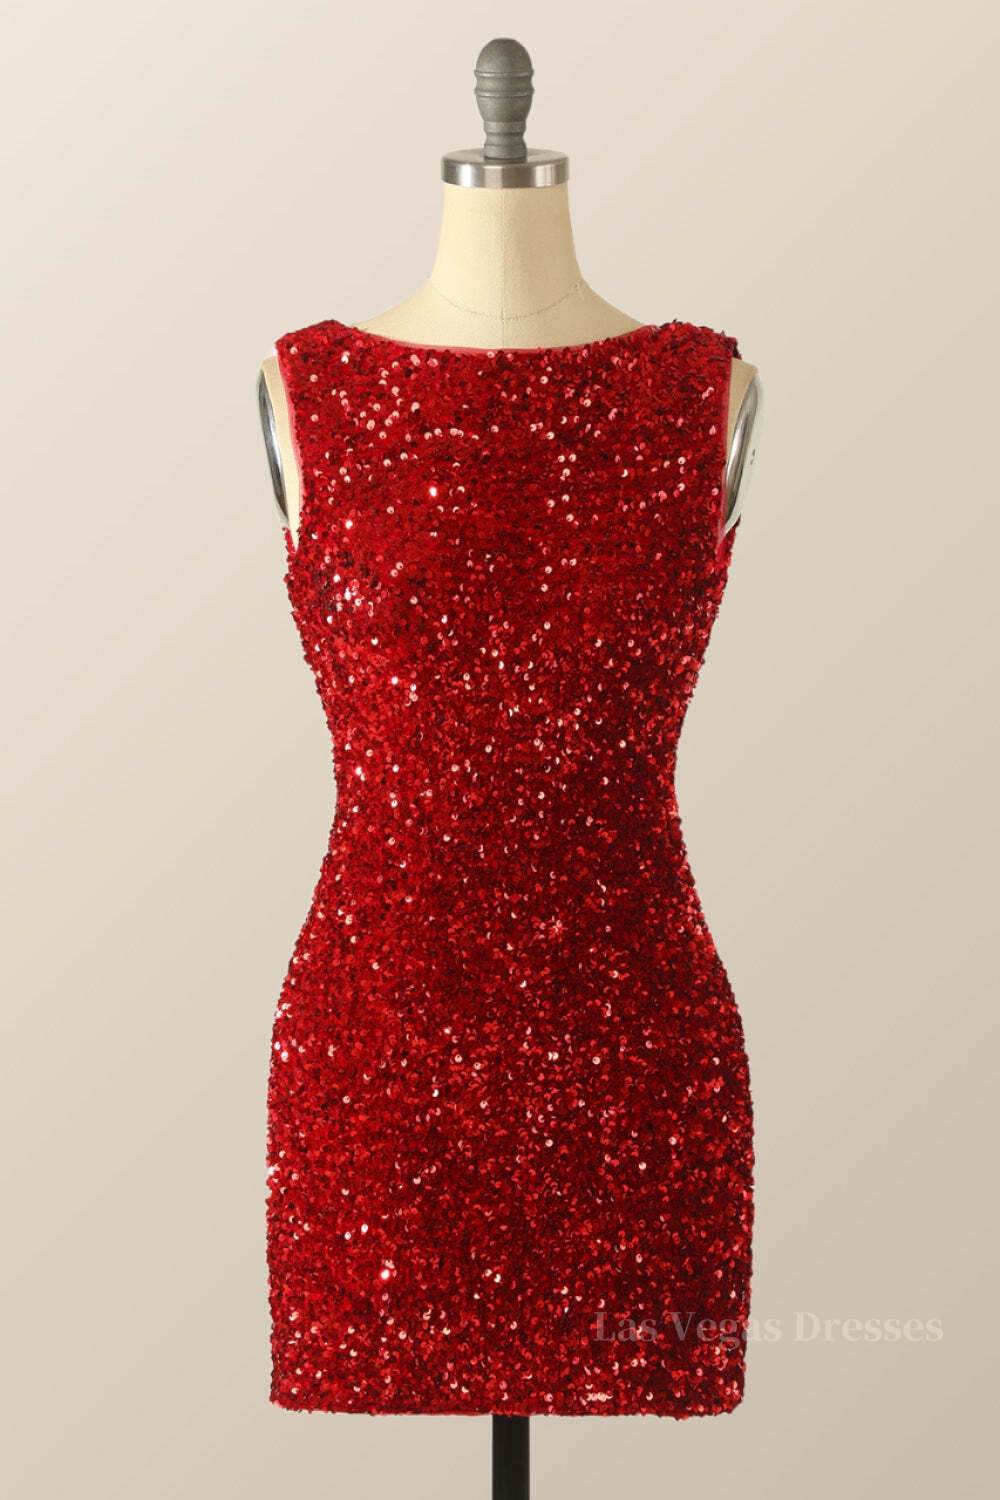 Scoop Red Sequin Tight Mini Dress with Cowl Back